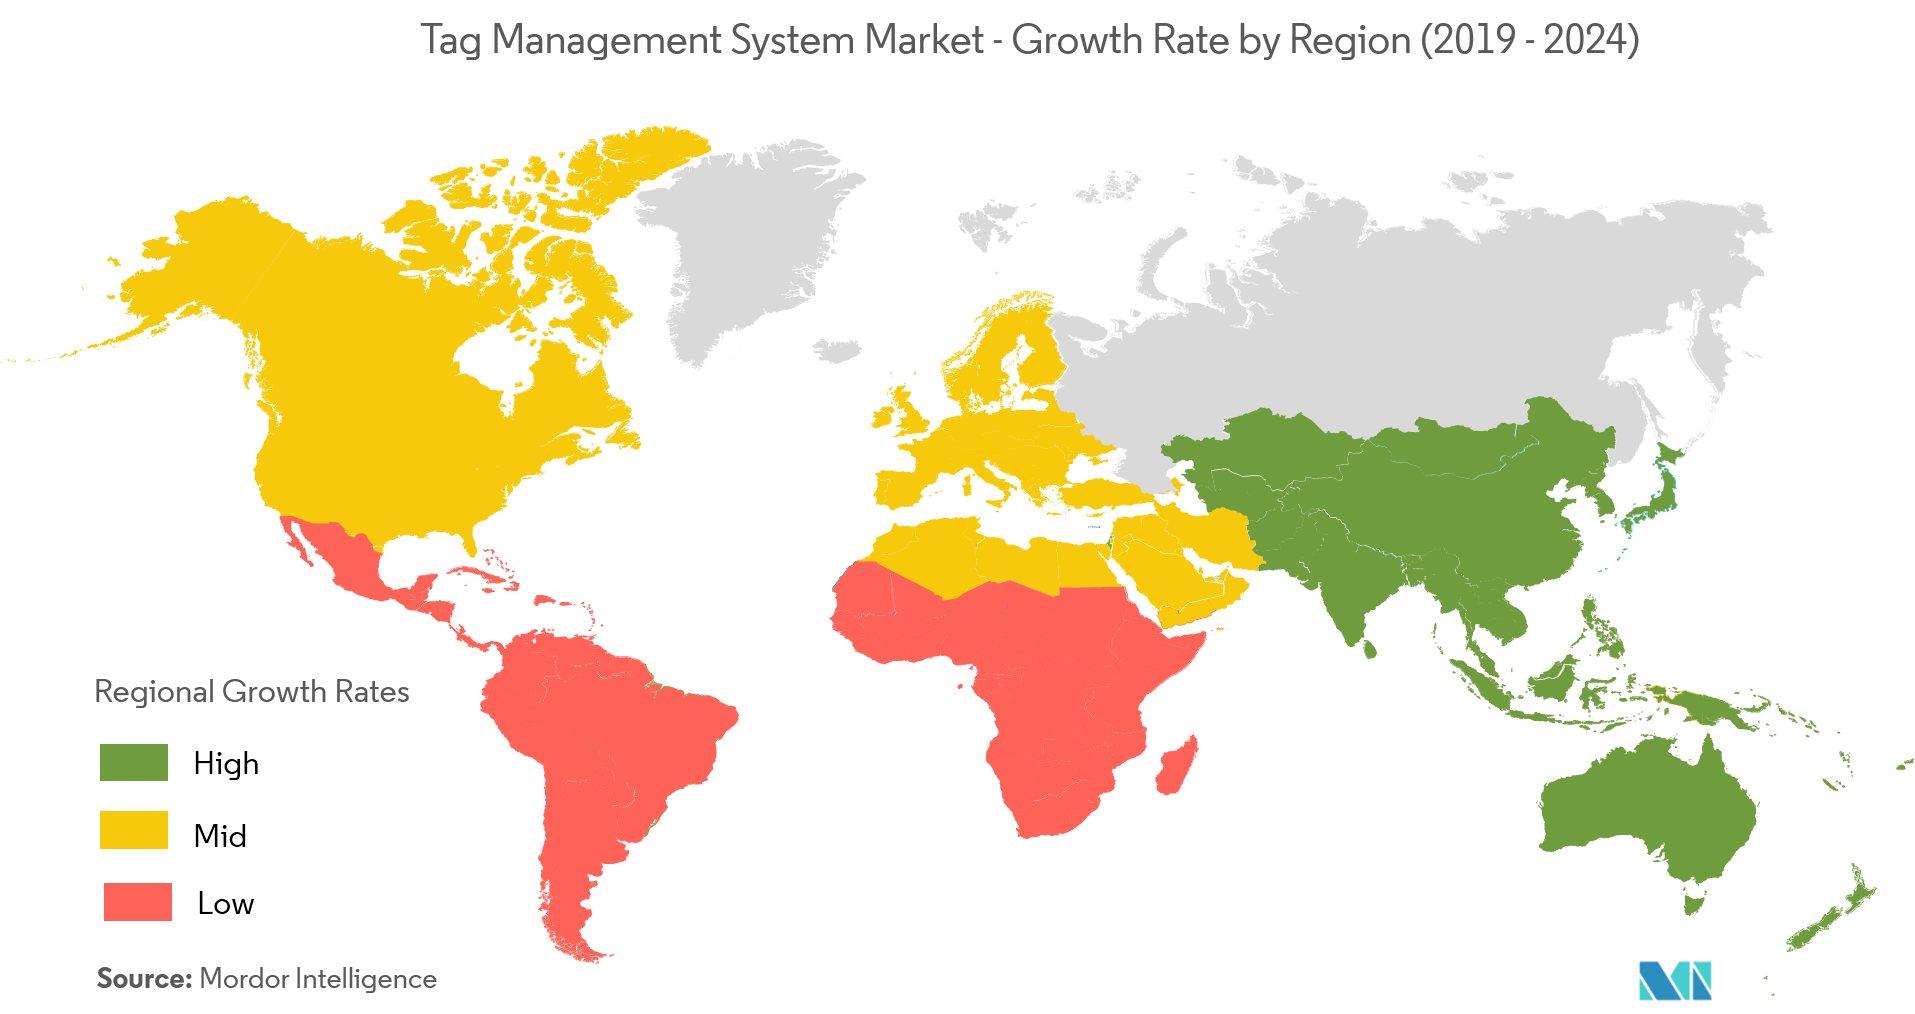 Tag Management System Market - Growth Rate by Region (2019 - 2024)